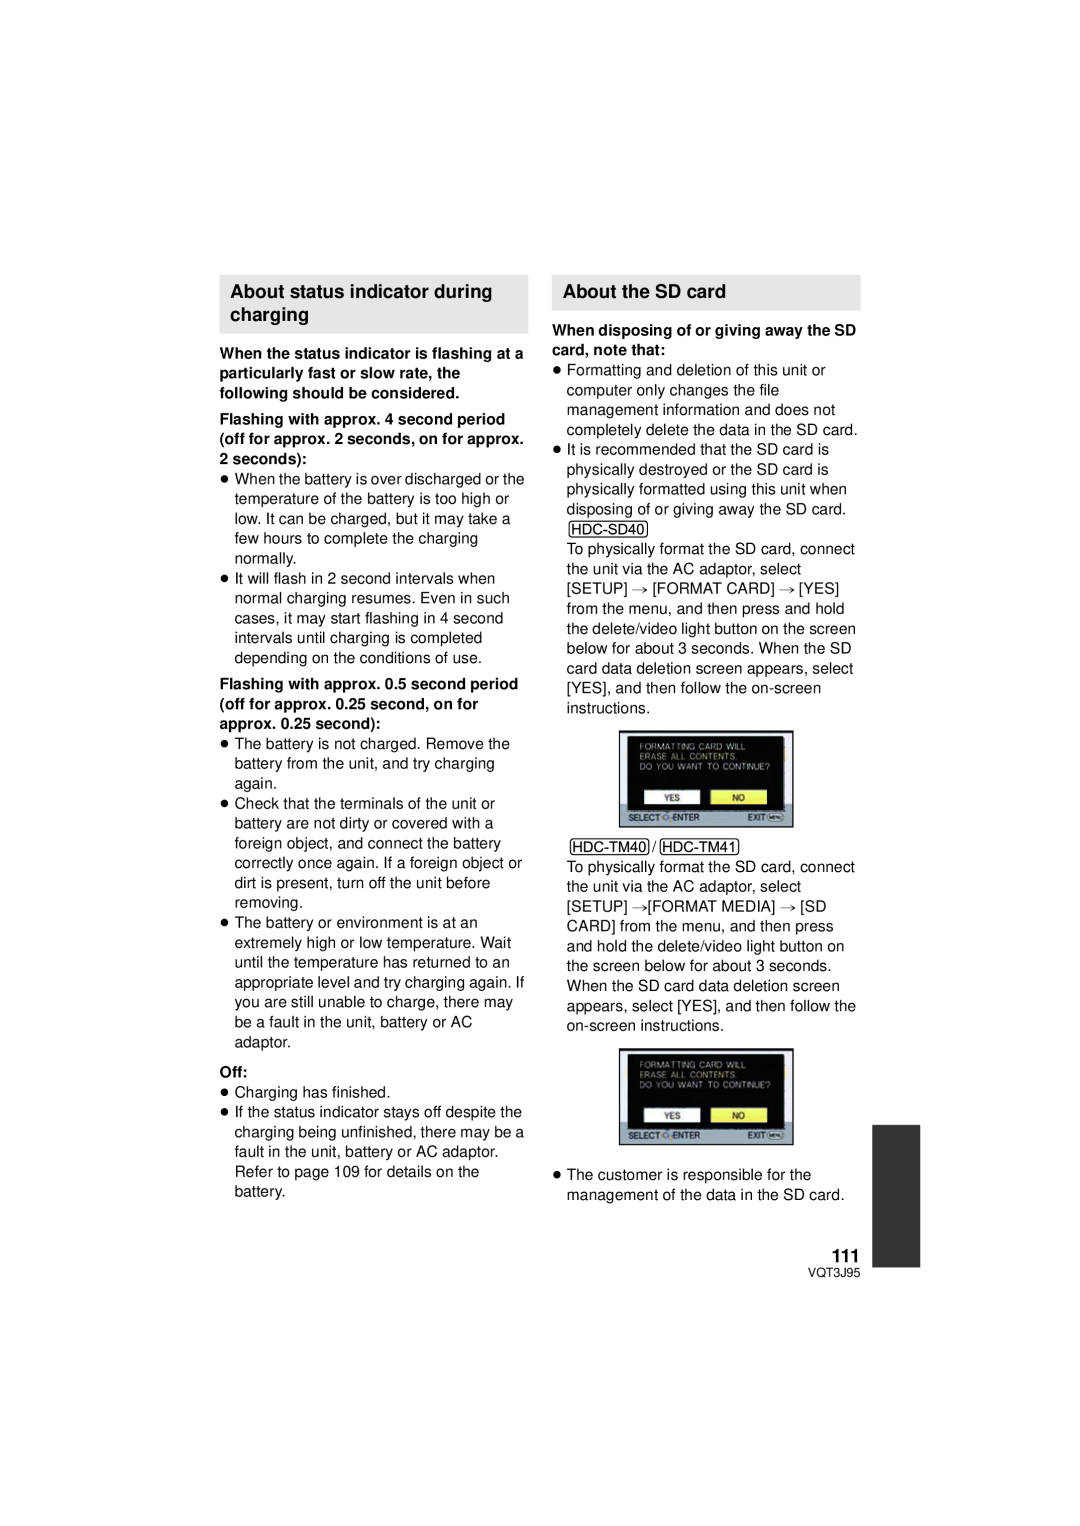 Panasonic HDC-SD40P/PC, HDC-TM41P/PC, HDC-TM40P/PC About status indicator during charging, About the SD card, seconds 